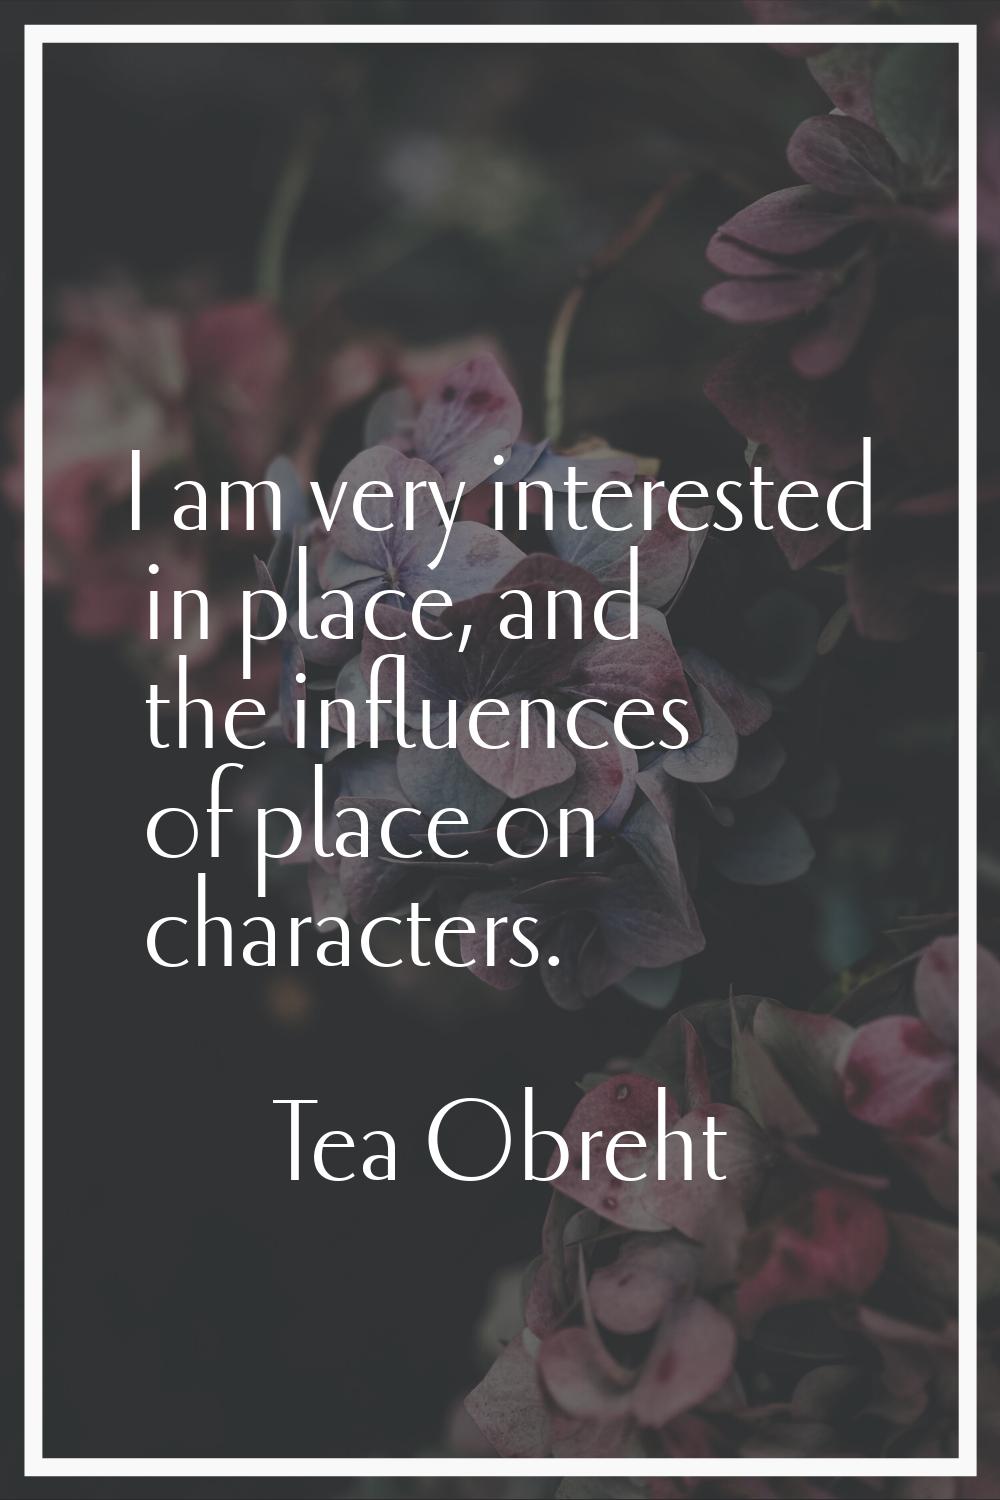 I am very interested in place, and the influences of place on characters.